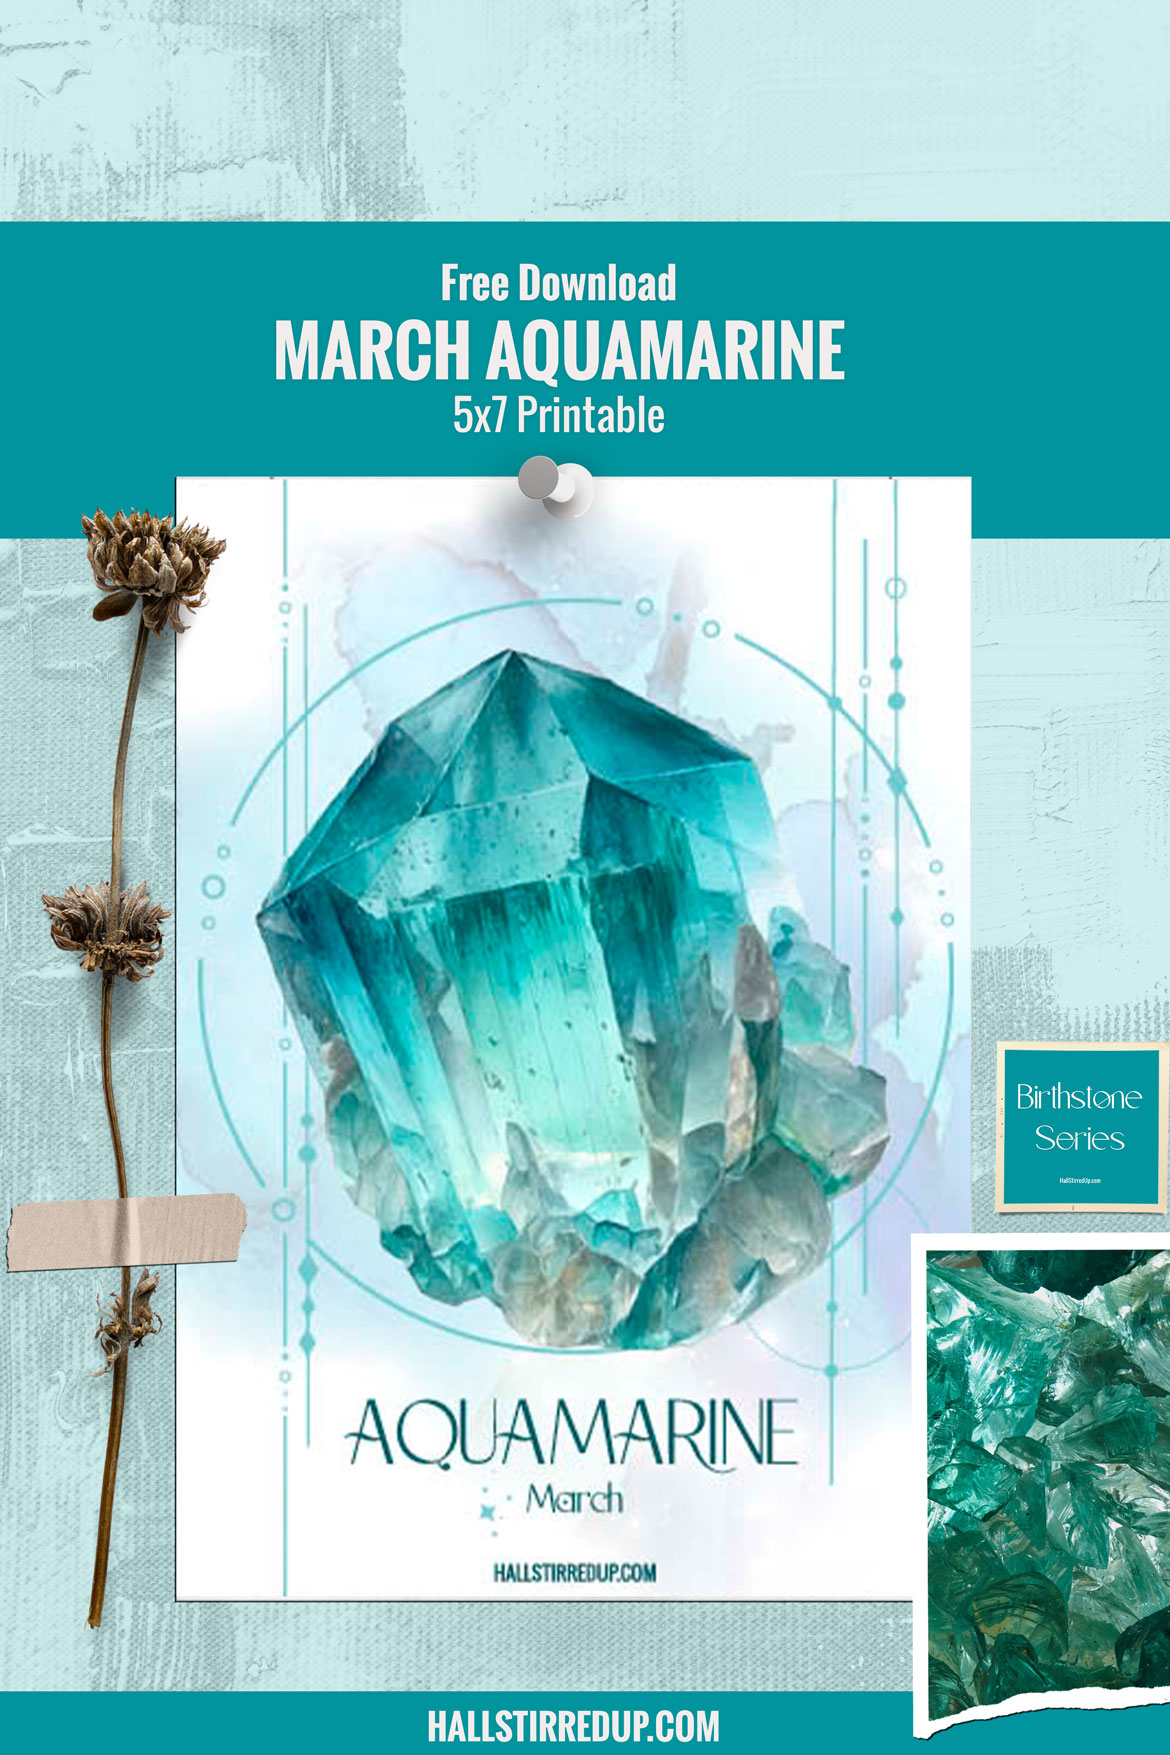 March's birthstone is the gorgeous Aquamarine - with free printable